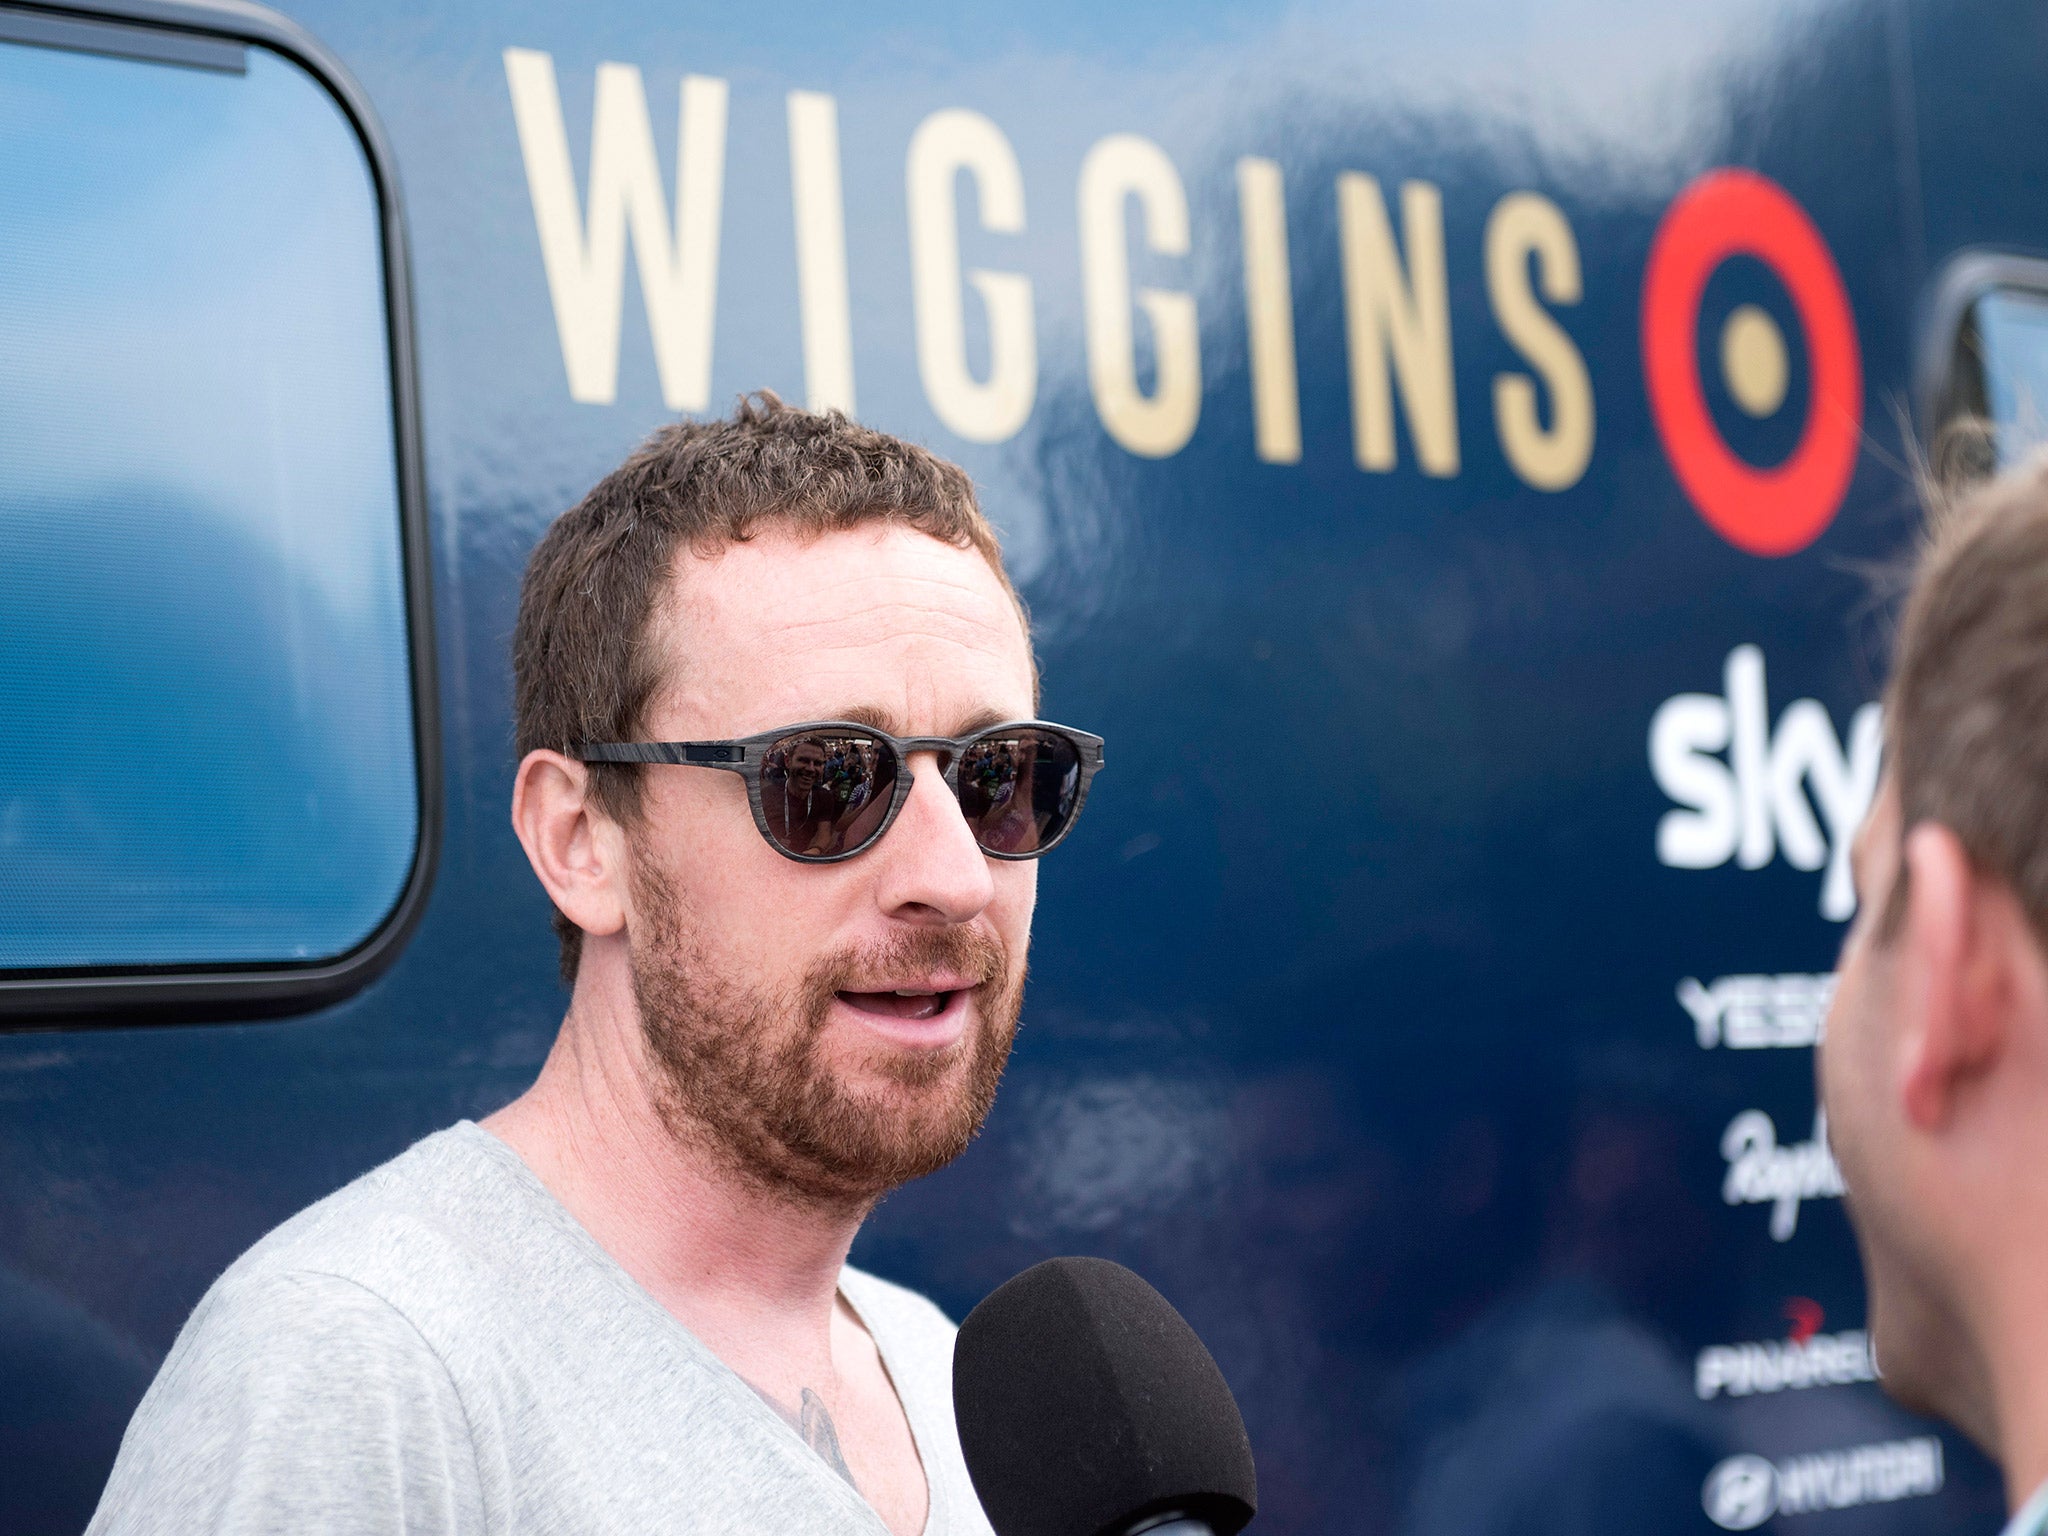 Bradley Wiggins is alleged to have received a suspect medical package in June 2011